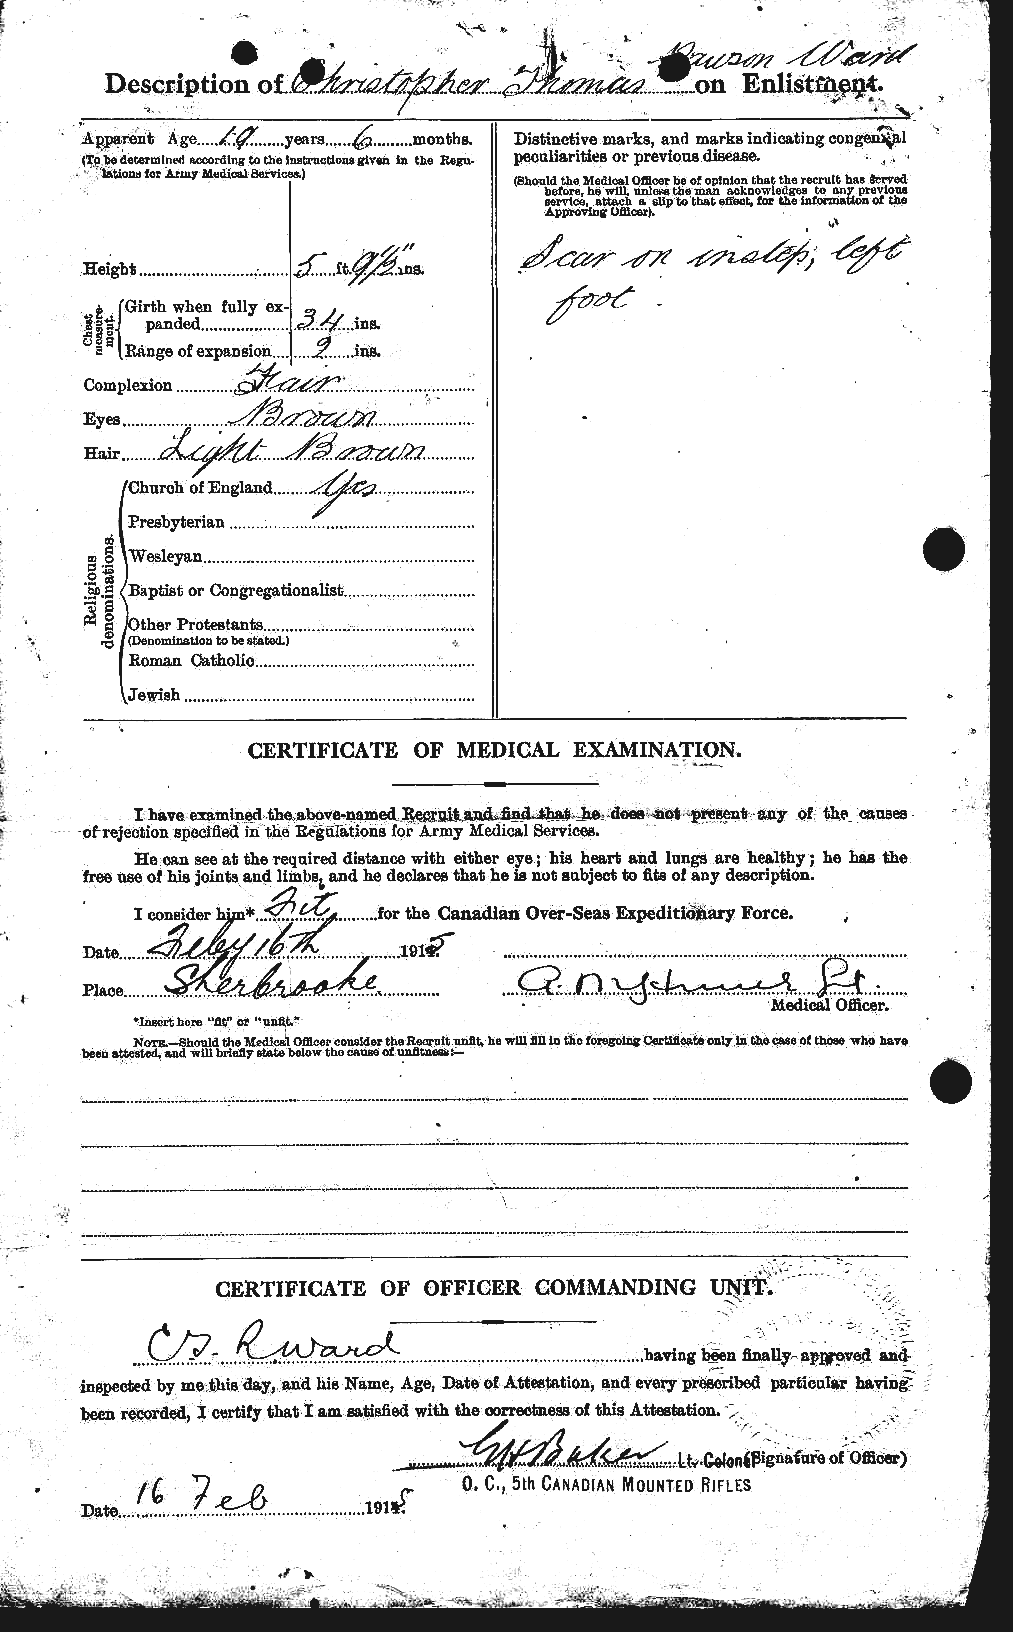 Personnel Records of the First World War - CEF 657601b